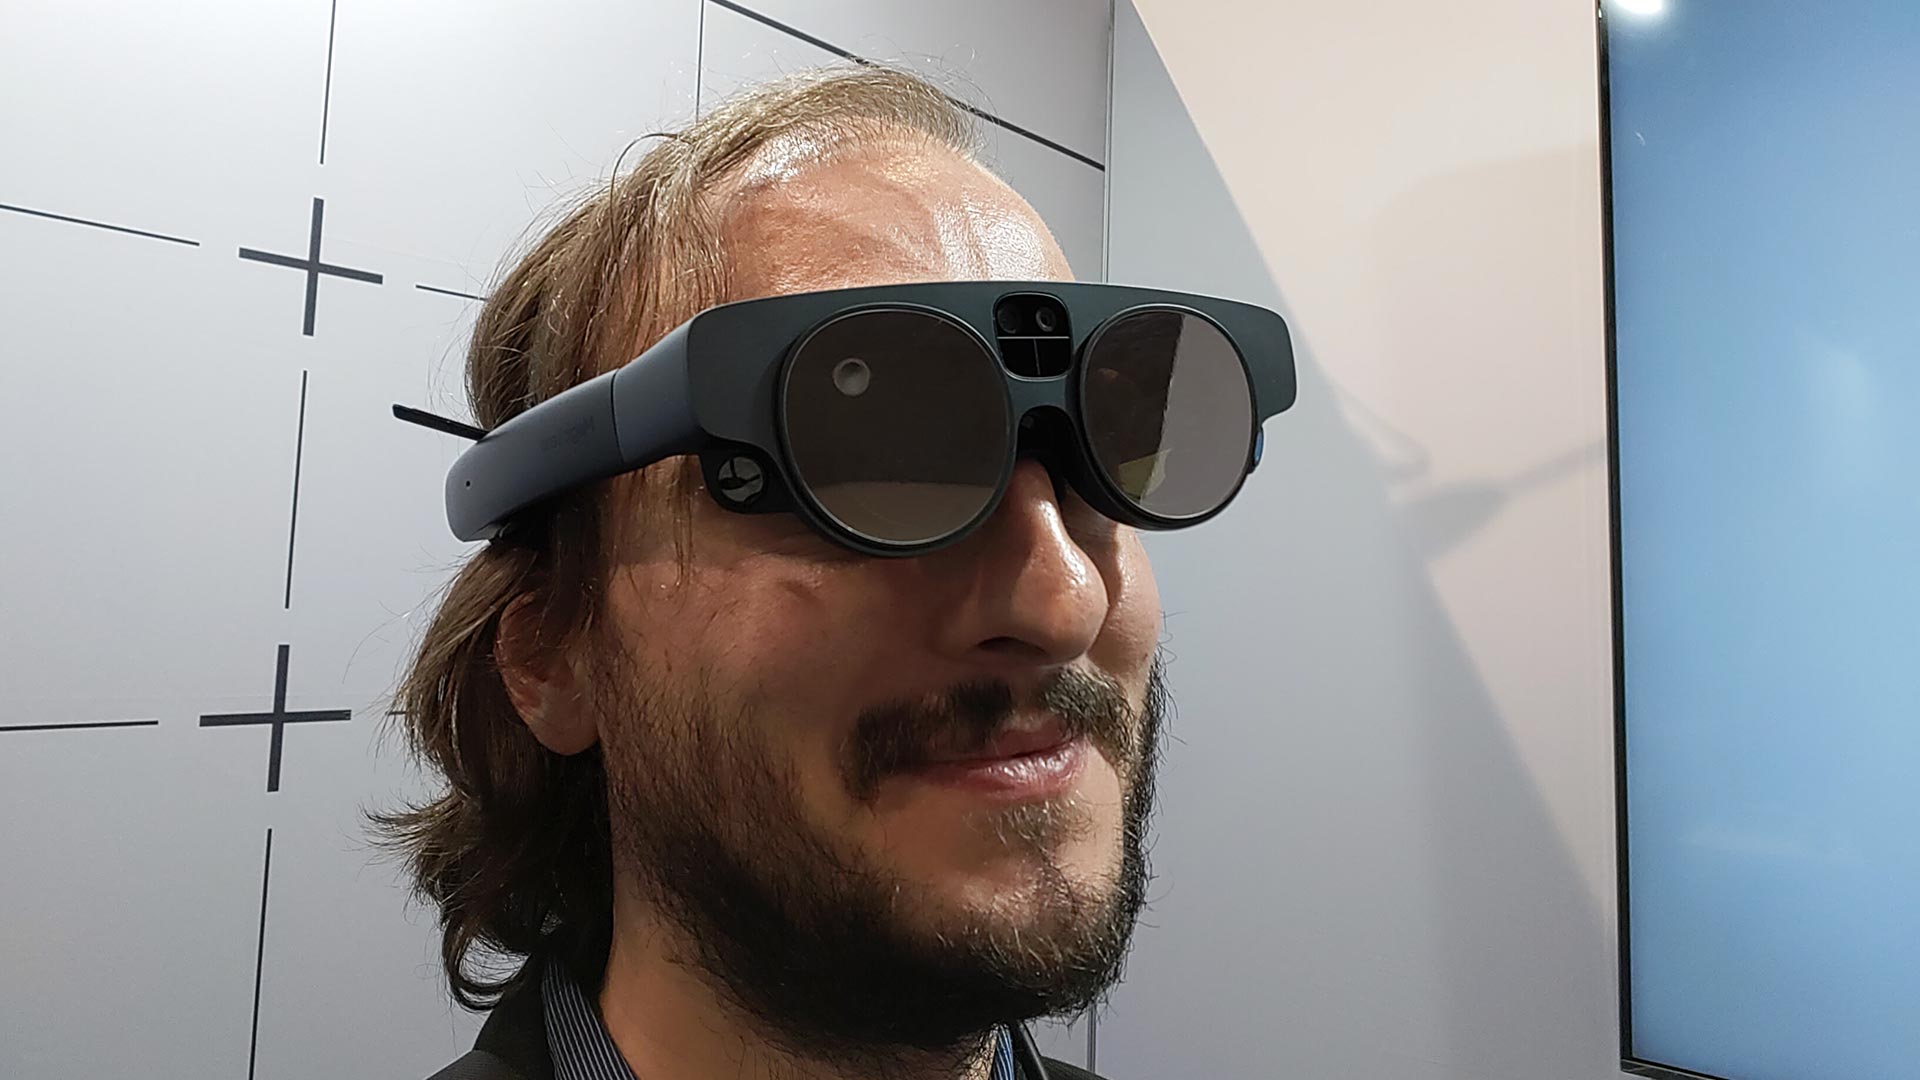 AWE 2022: Hands-on with Magic Leap 2 and its awesome visuals